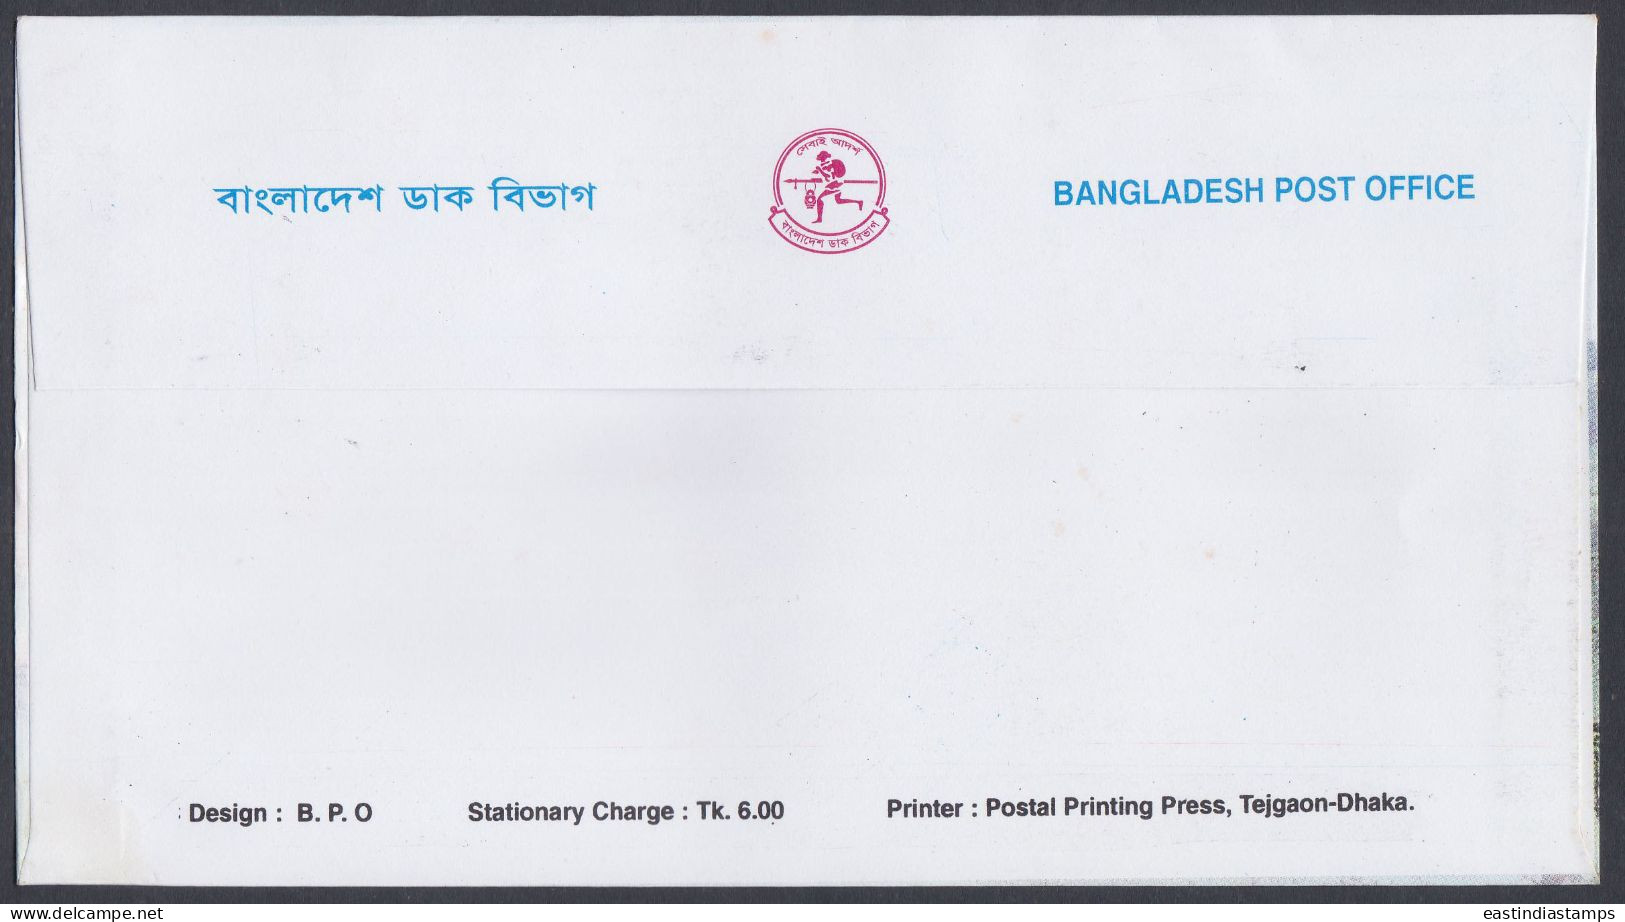 Bangladesh 2010 FDC Indigenous Peoples, Native People, Natives, Tribal, Women, First Day Cover - Bangladesch